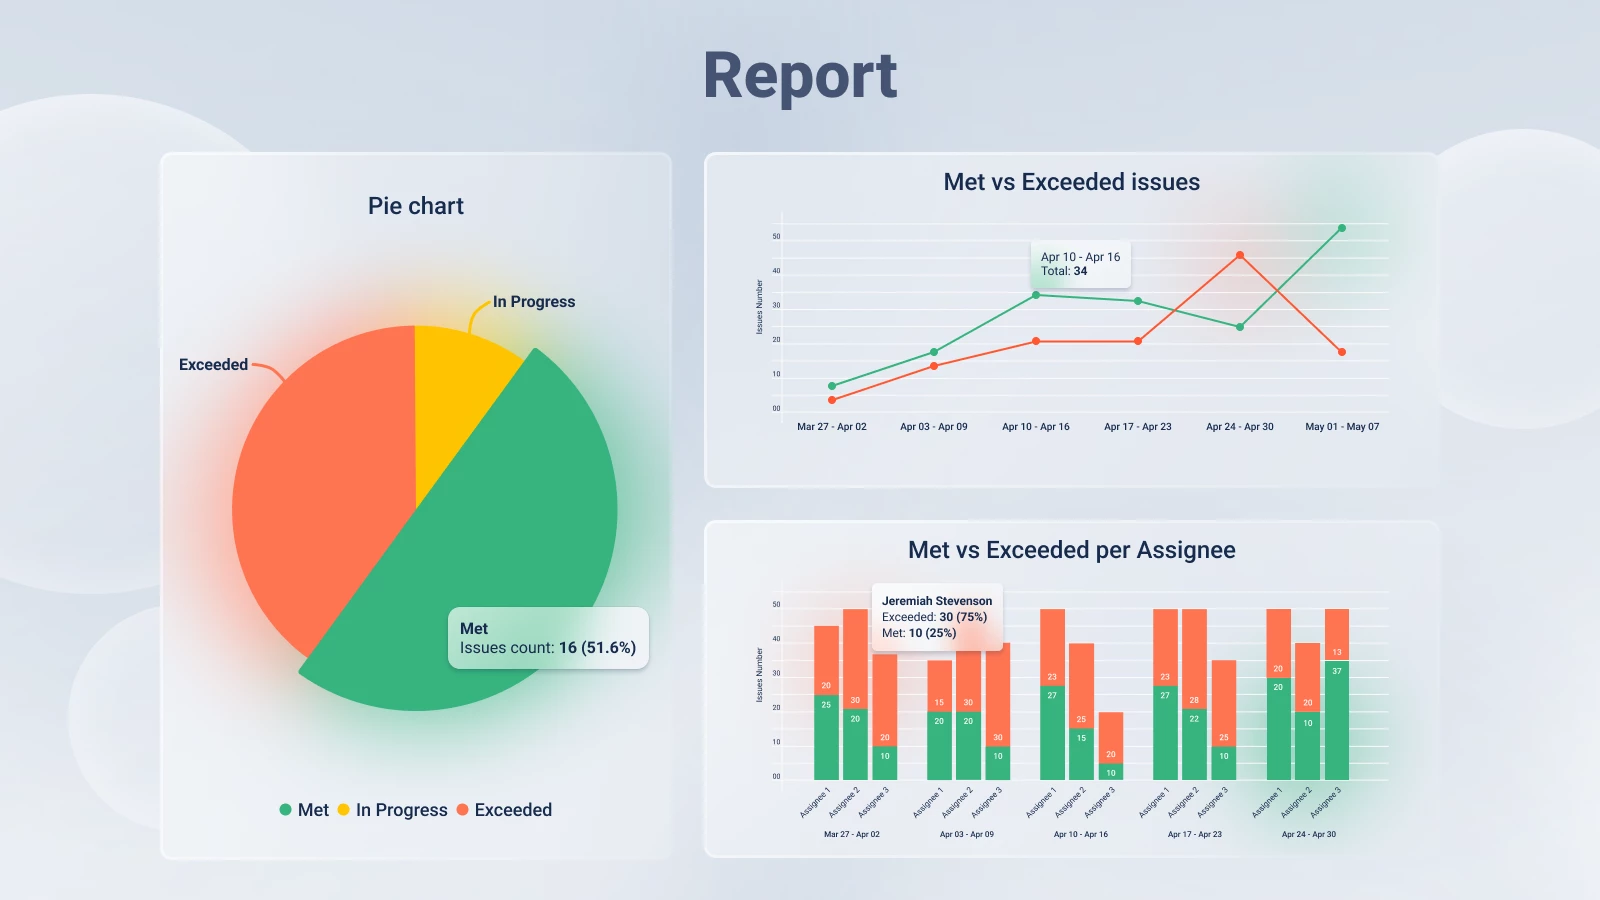 By viewing data about exceeded, met, and in-progress issues in SLA reports, you can see where improvement to the customer experience is needed.